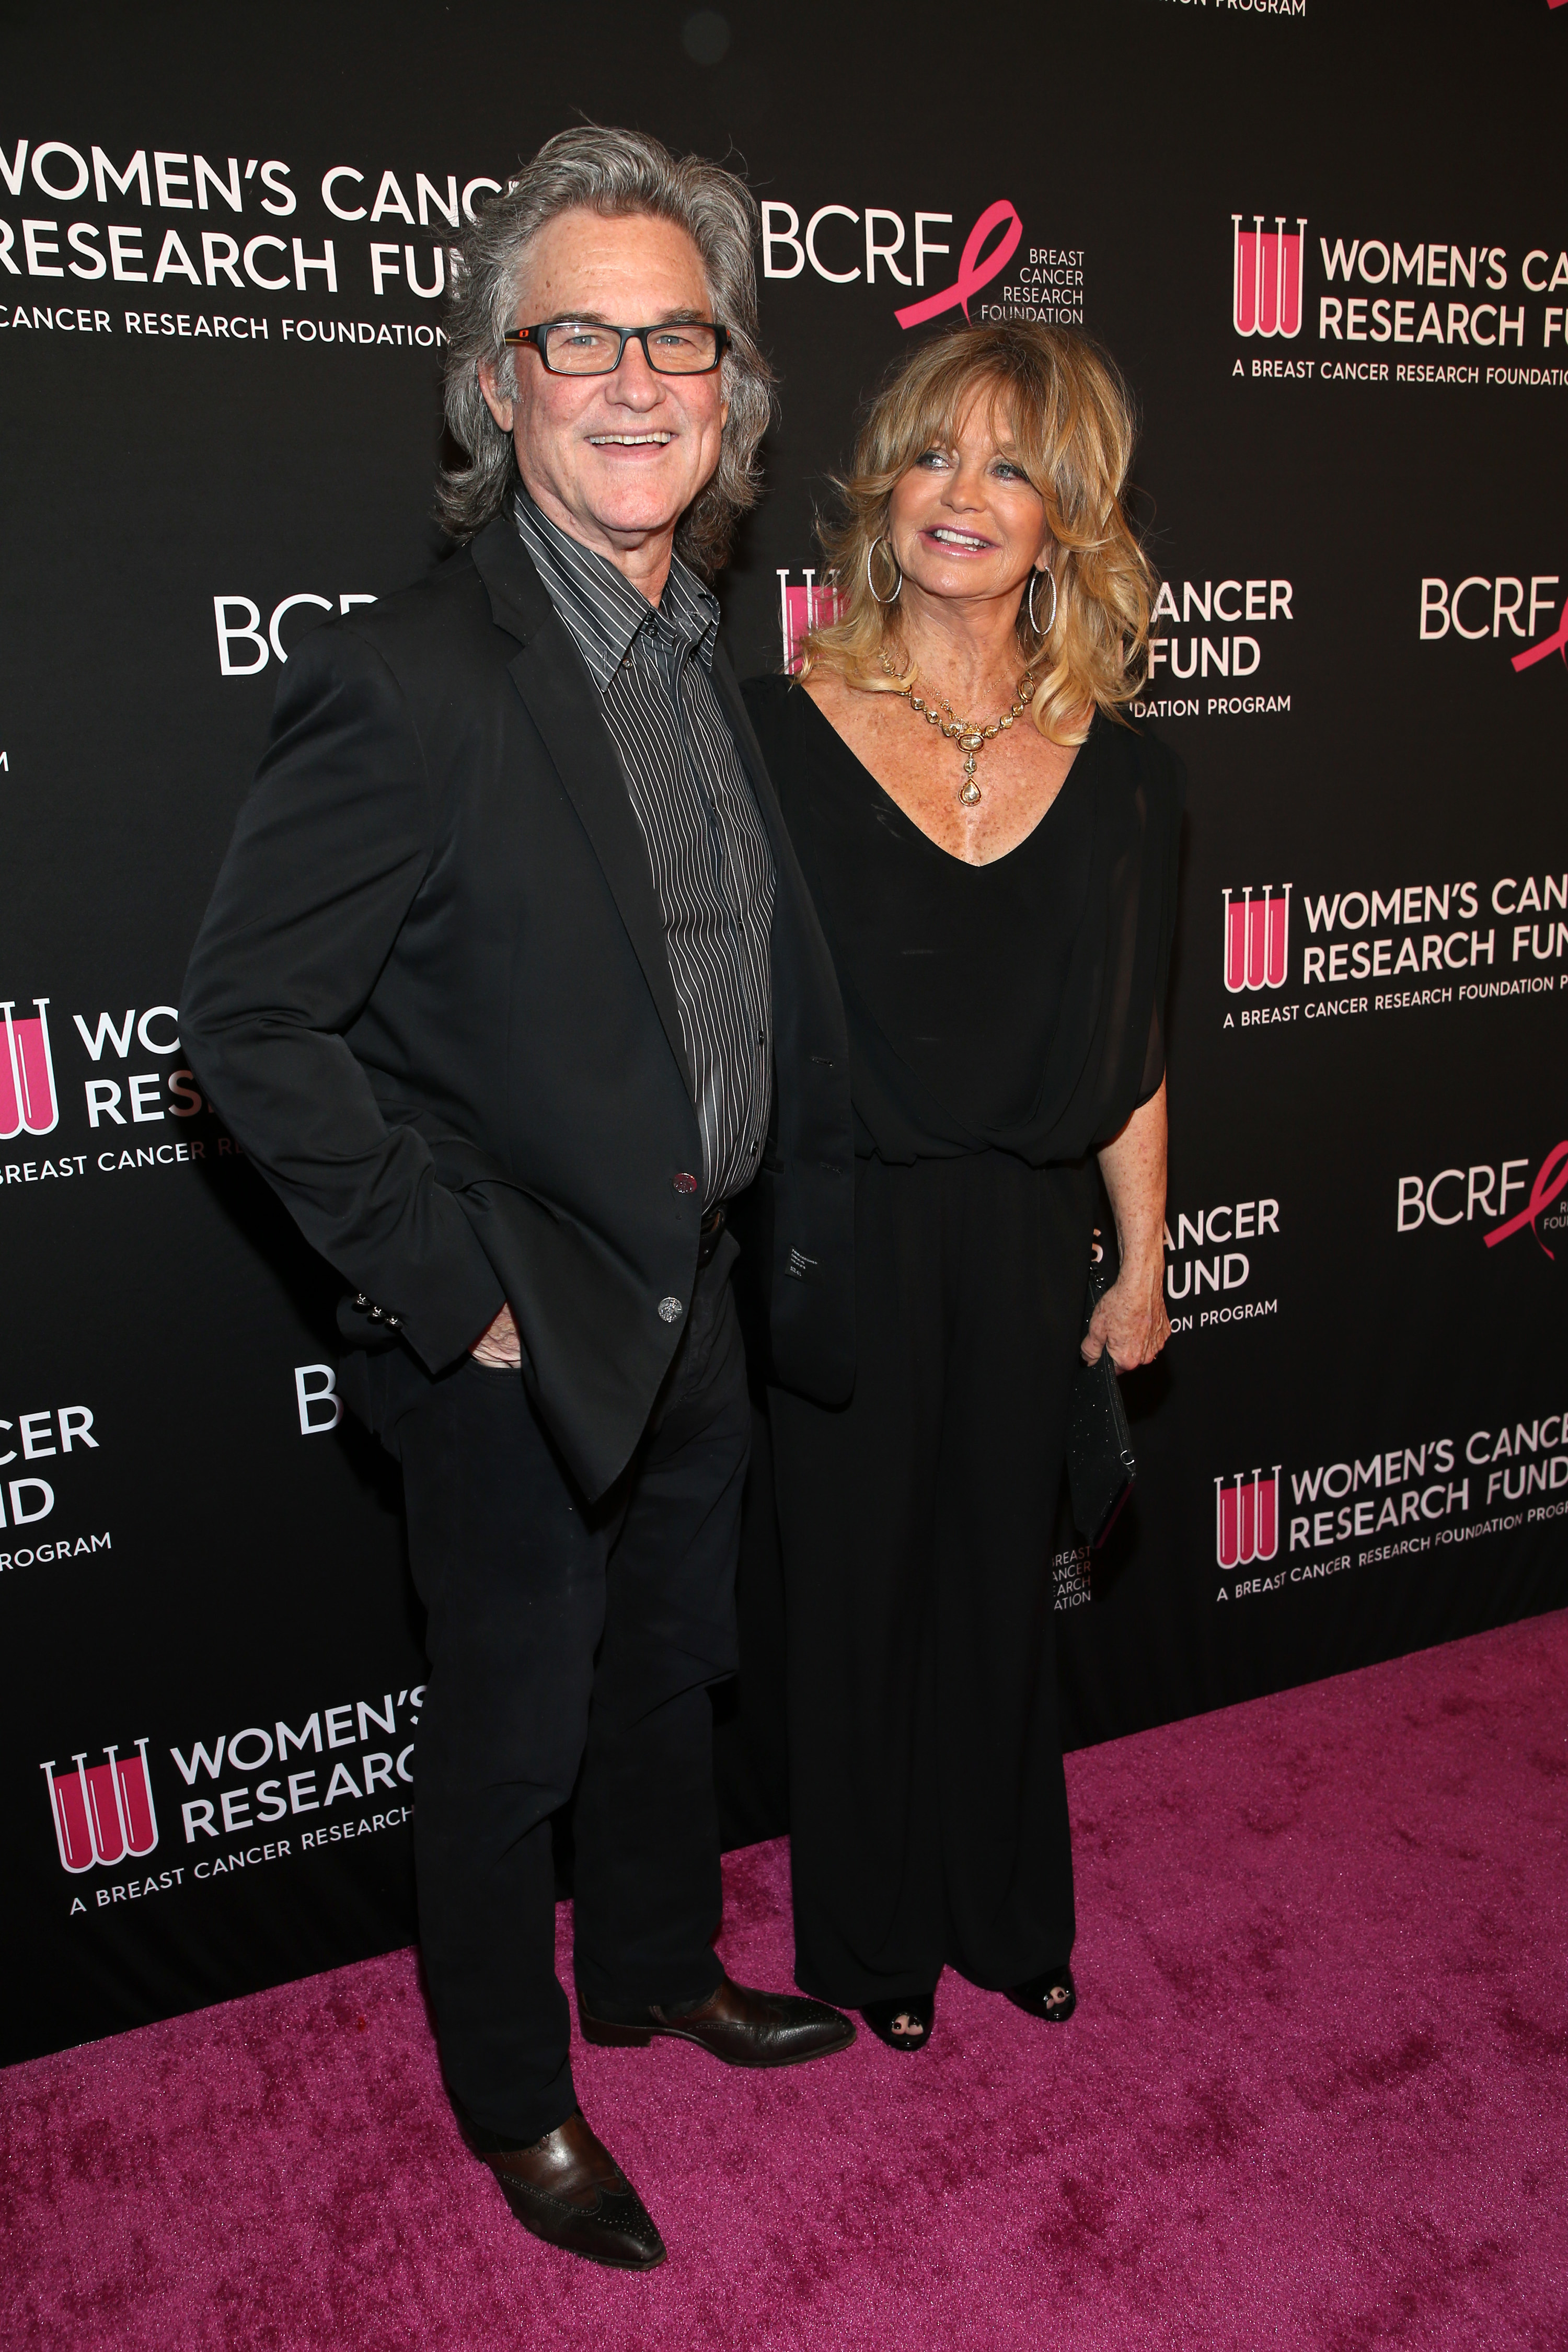 Kurt Russell and Goldie Hawn on the red carpet